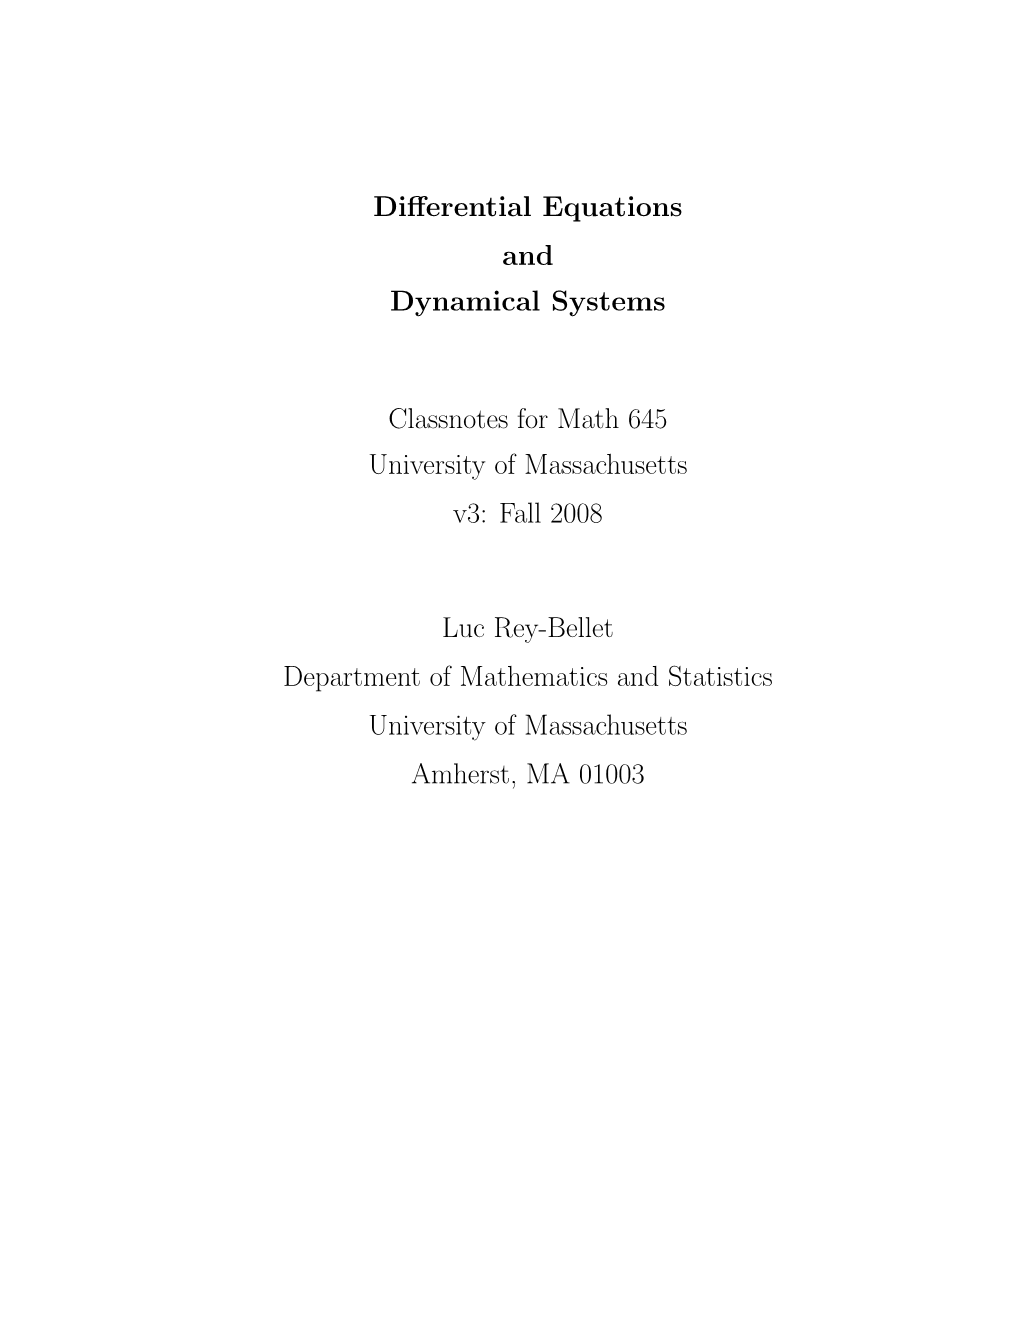 Differential Equations and Dynamical Systems Classnotes for Math 645 University of Massachusetts V3